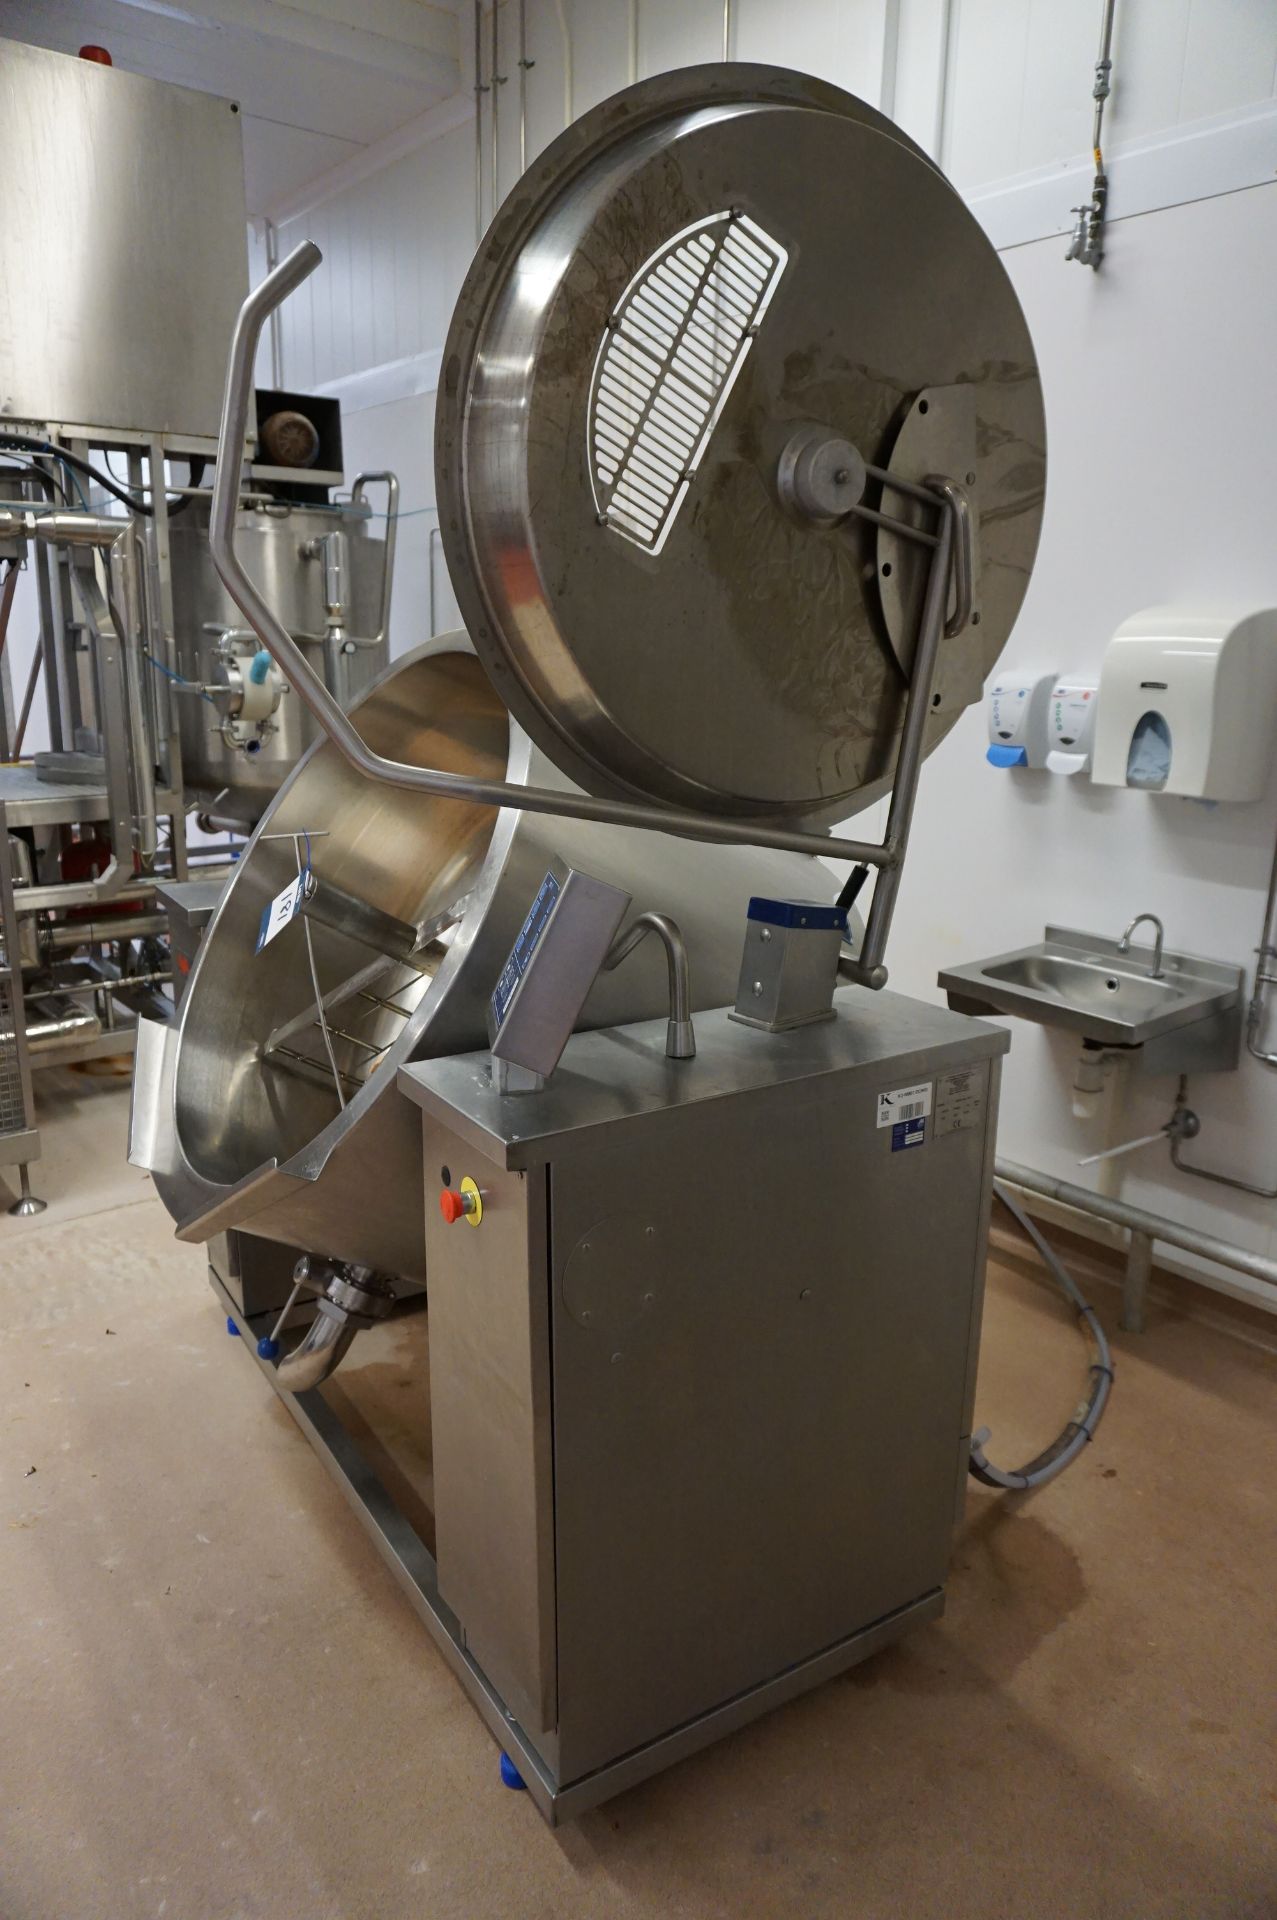 DC Norris, Model: MM300, 300kg cooking vat, Serial No. N2723 (2012) with tilting function and Joni - Image 5 of 7